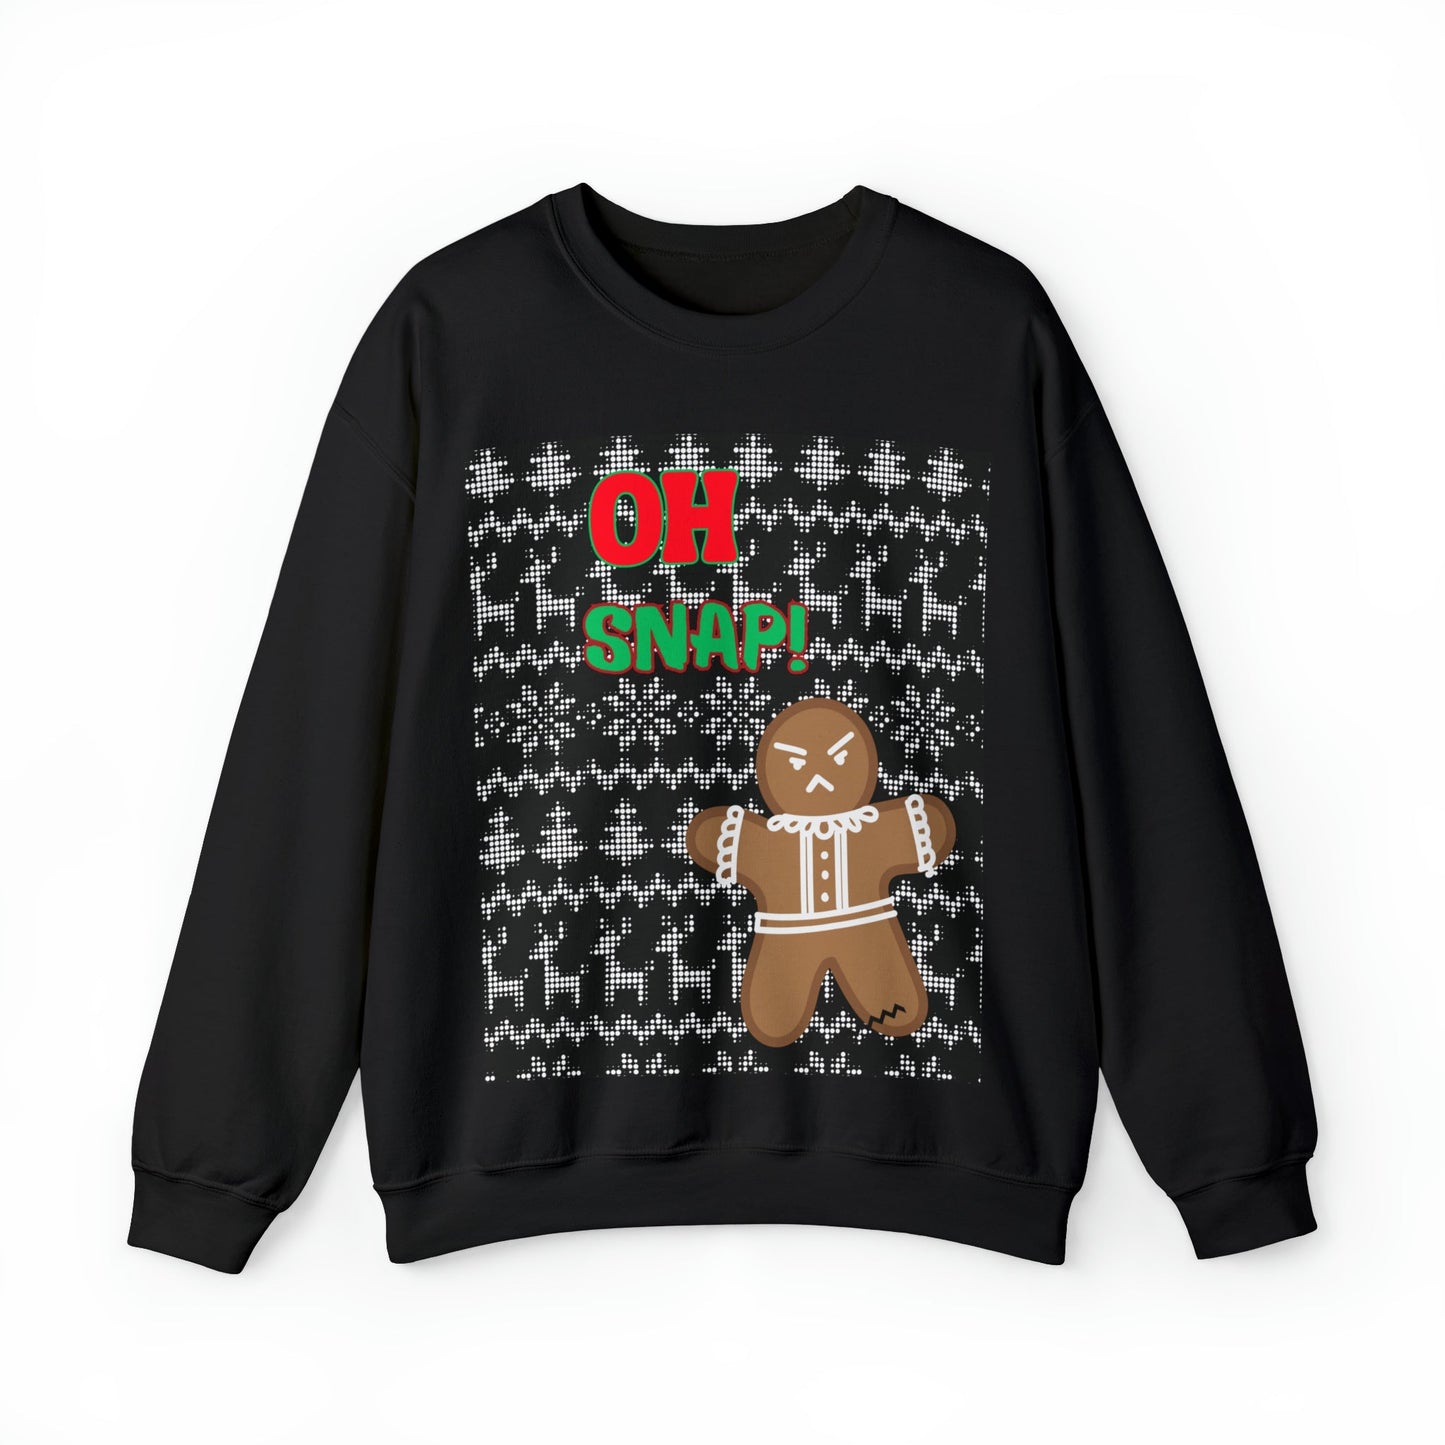 Get trendy with Oh Snap! Ugly Christmas Sweater - Sweatshirt available at Good Gift Company. Grab yours for $29.99 today!